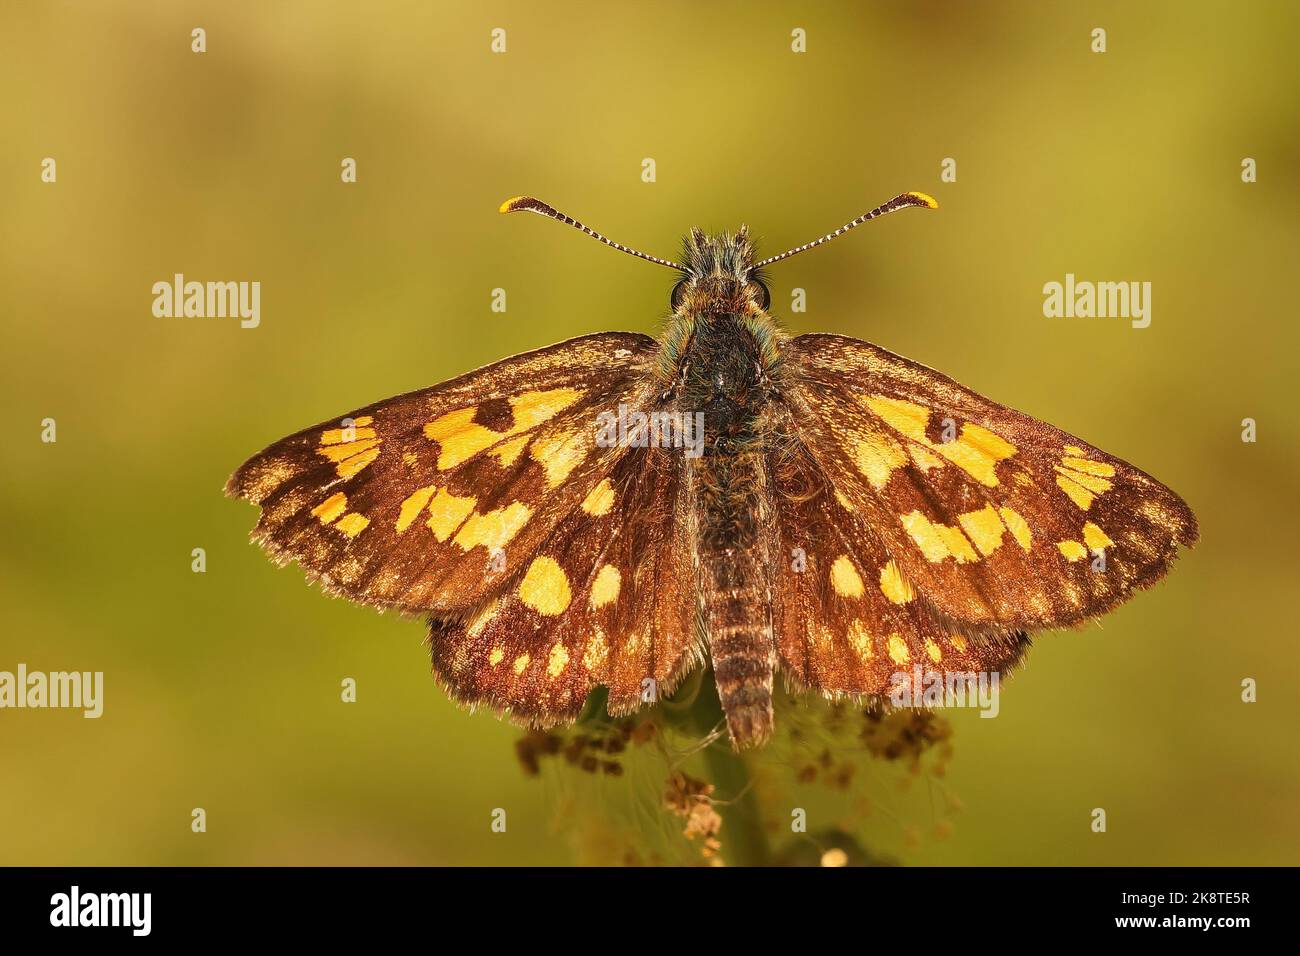 Closeup on the rare Chequered skipper, Carterocephalus palaemon sitting with open wings against a green background Stock Photo